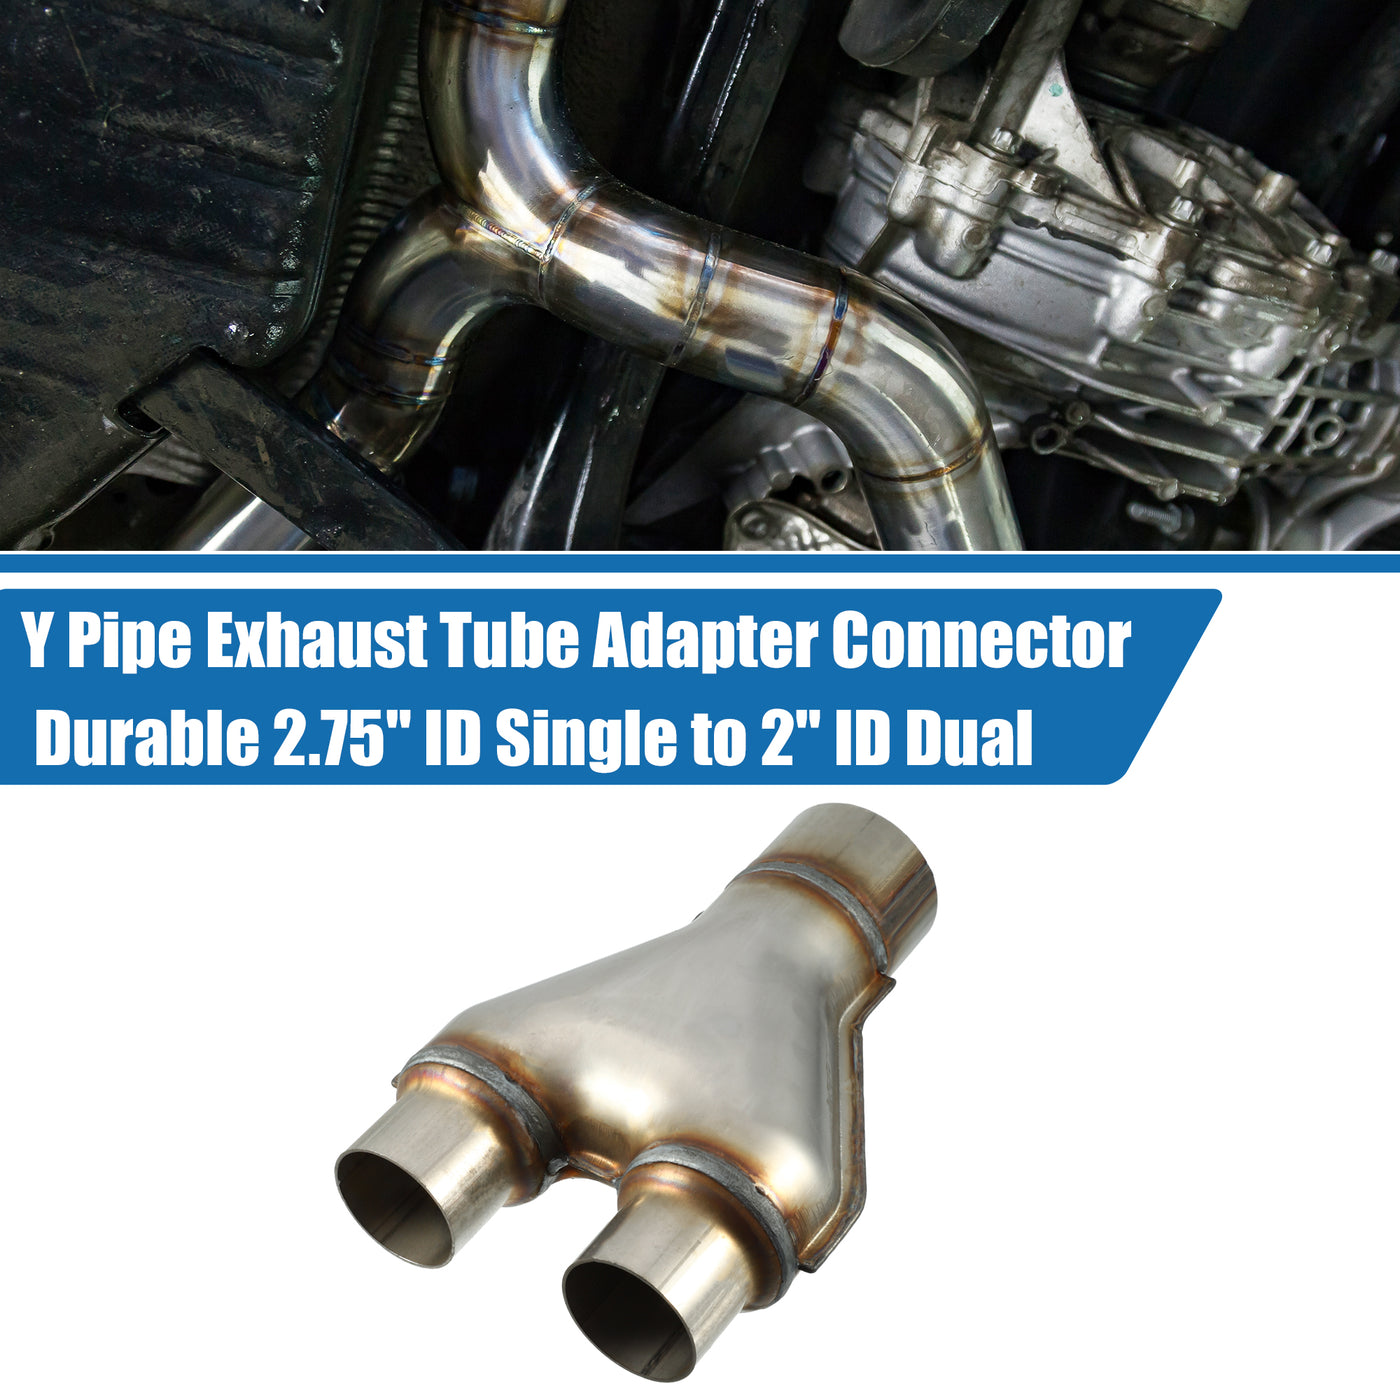 A ABSOPRO Y Pipe Exhaust Tube Adapter Connector Durable 2.75" ID Single to 2" ID Dual Exhaust Adapter Connector 10 Inch Overall Length T409 Stainless Steel Silver Tone